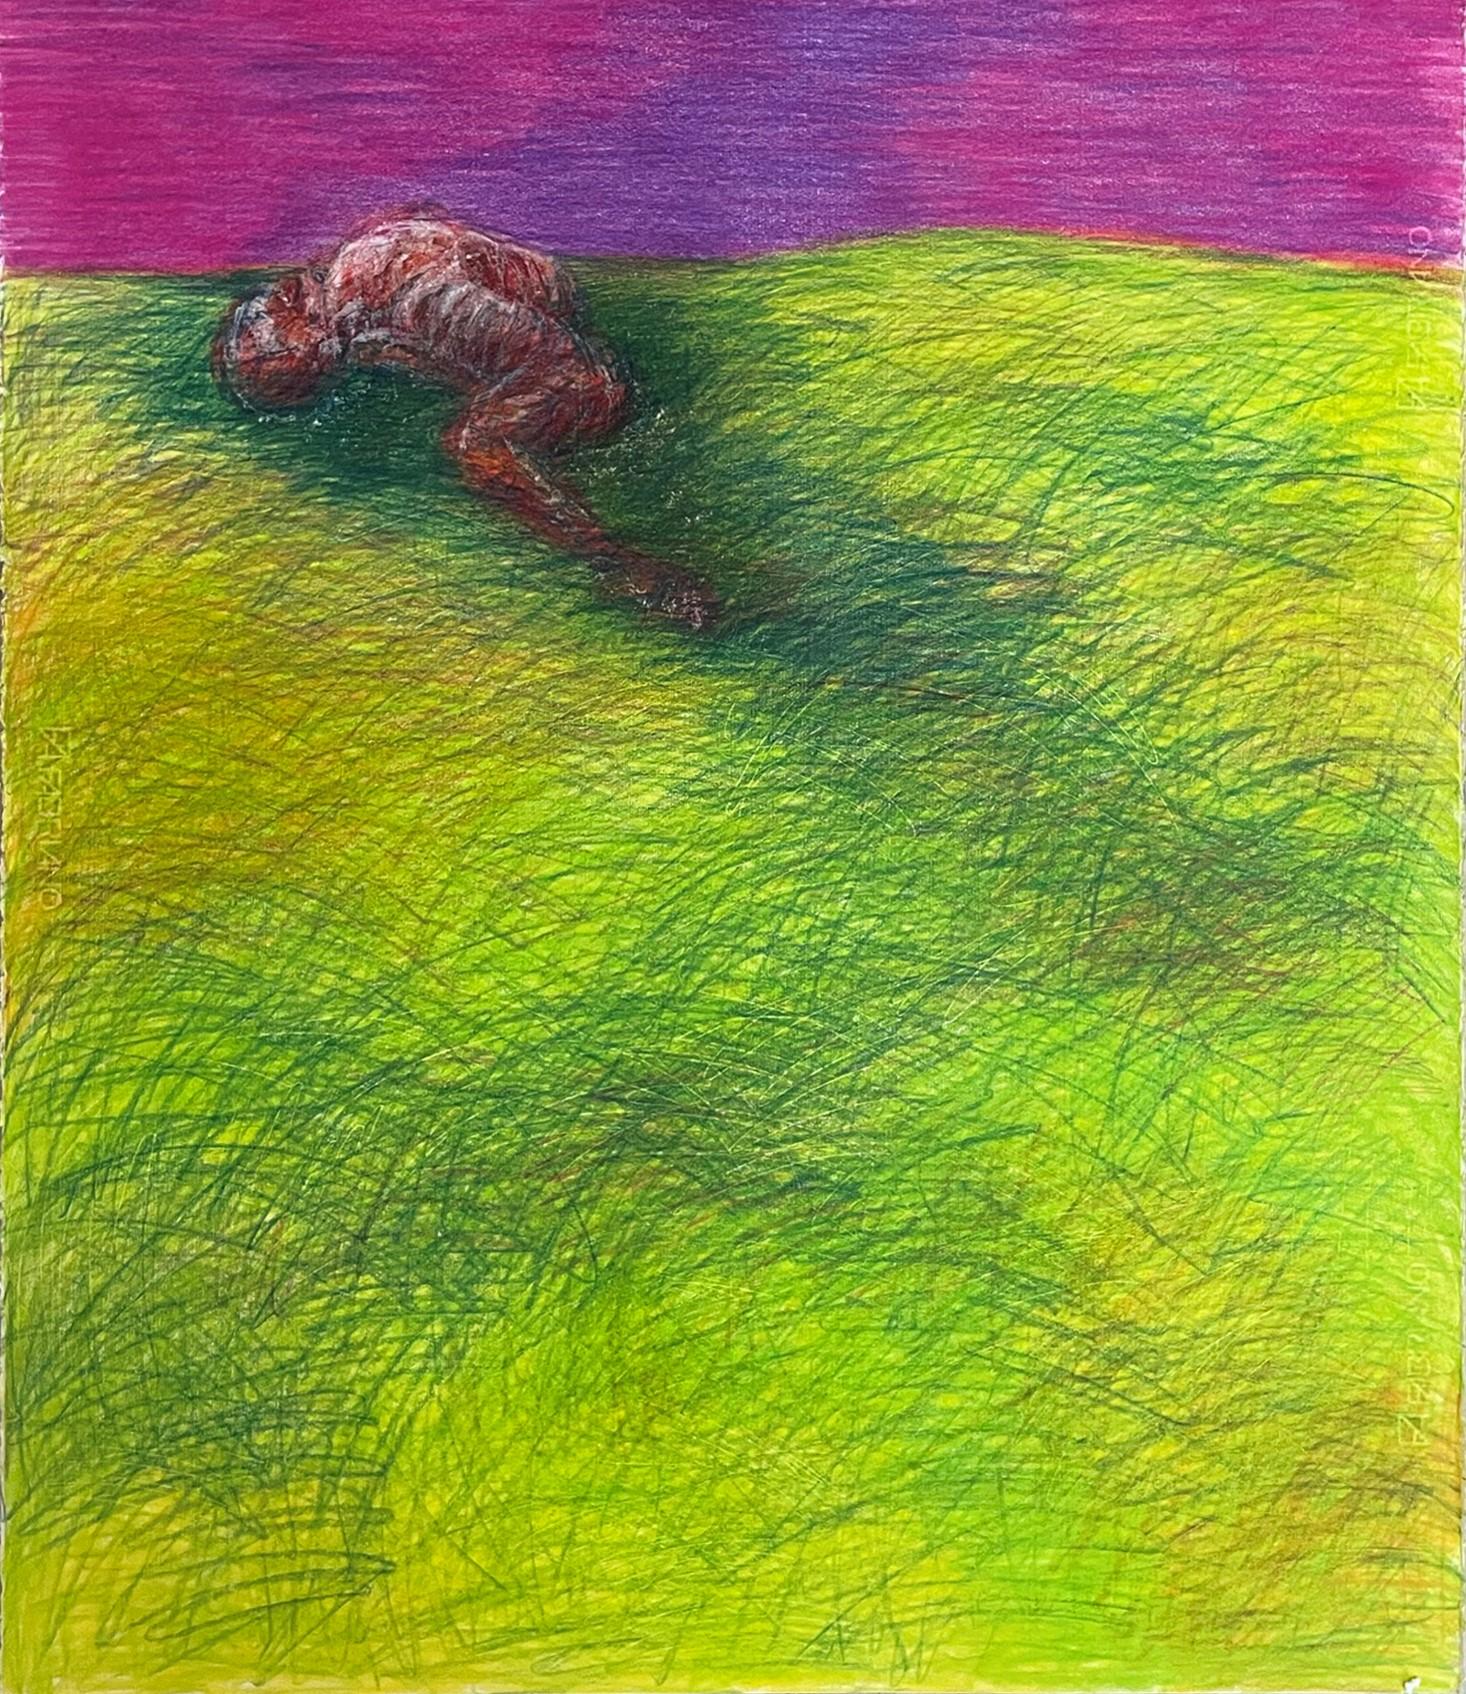 Untitled_Remains. The Dead Body on the Field - Neo-Expressionist Art by Zsolt Berszán